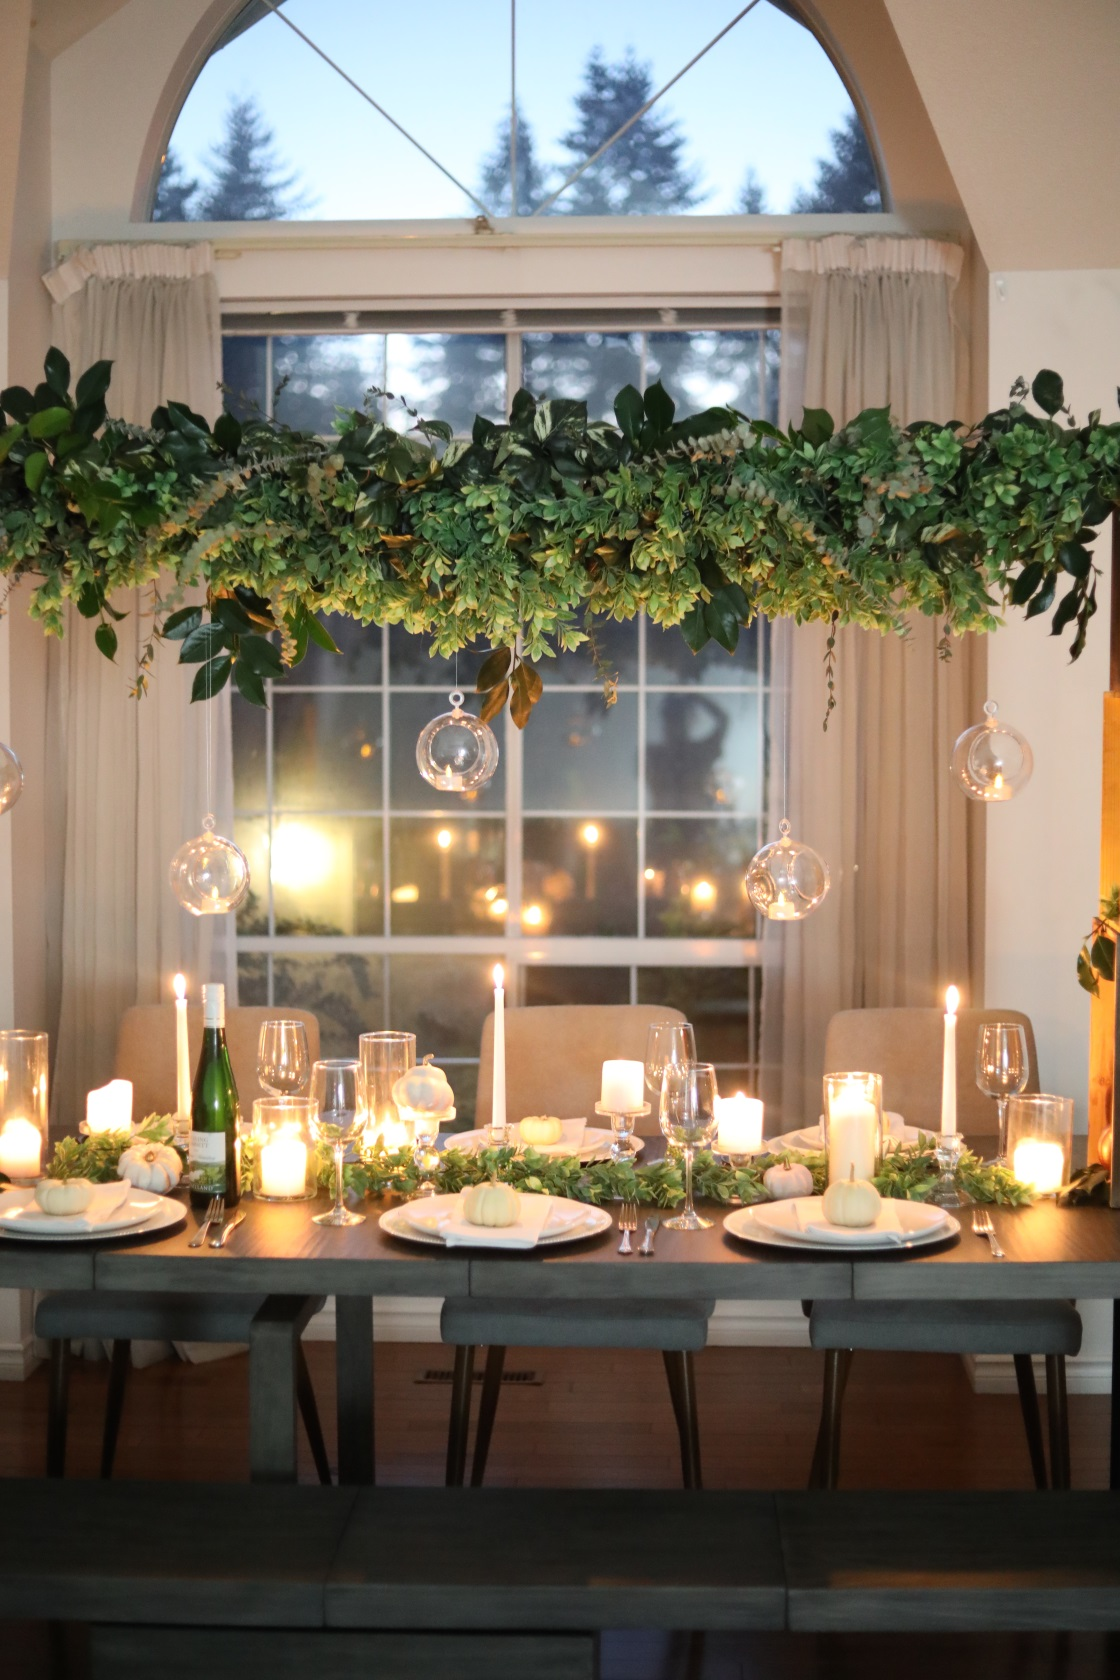 A dining table decorated with a hanging wreath.